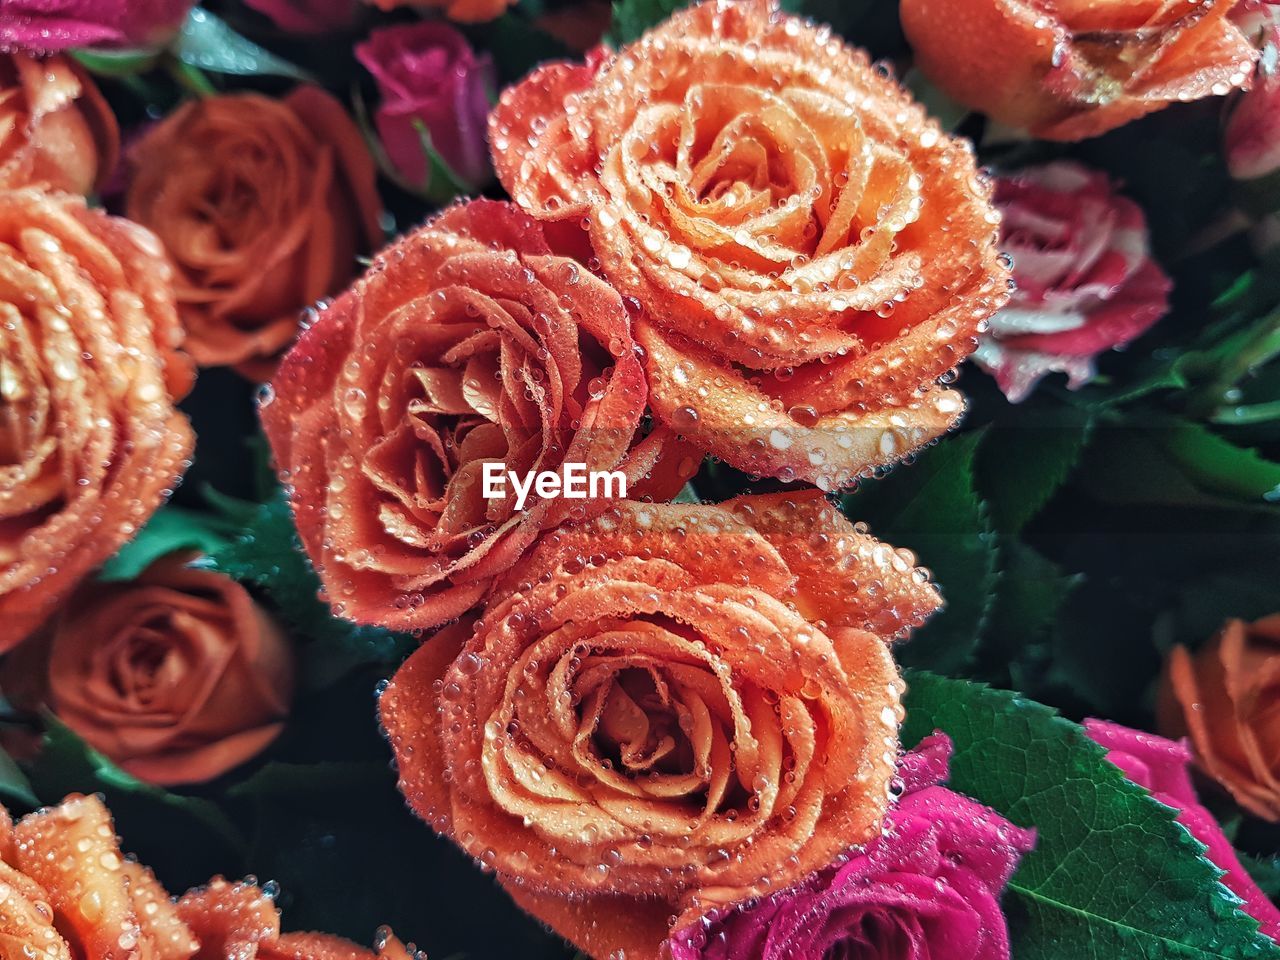 CLOSE-UP OF ROSES BY FLOWERS